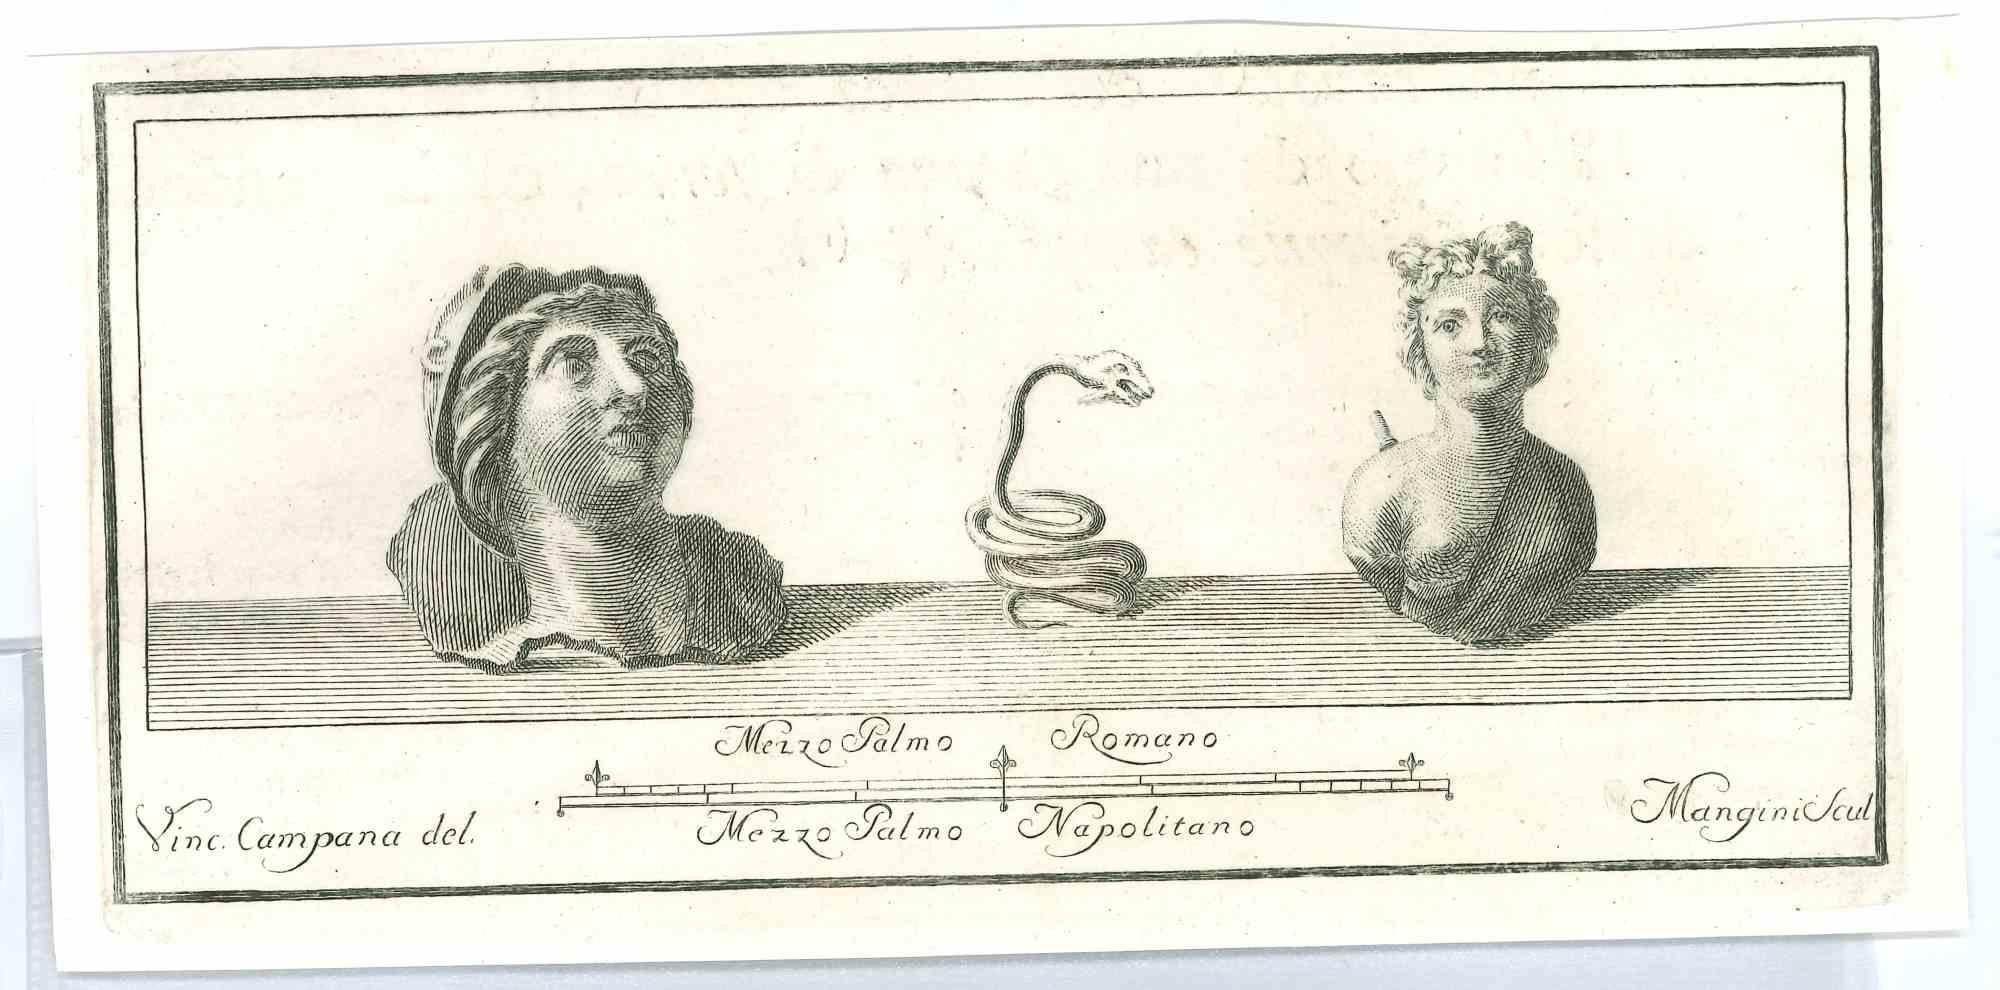 Angitia  - Marsian Goddess of Snakes and Healing, from the series "Antiquities of Herculaneum", is an original etching on paper realized by Vincenzo Campana in the 18th century.

Signed on the plate.

Guter Zustand.

The etching belongs to the print